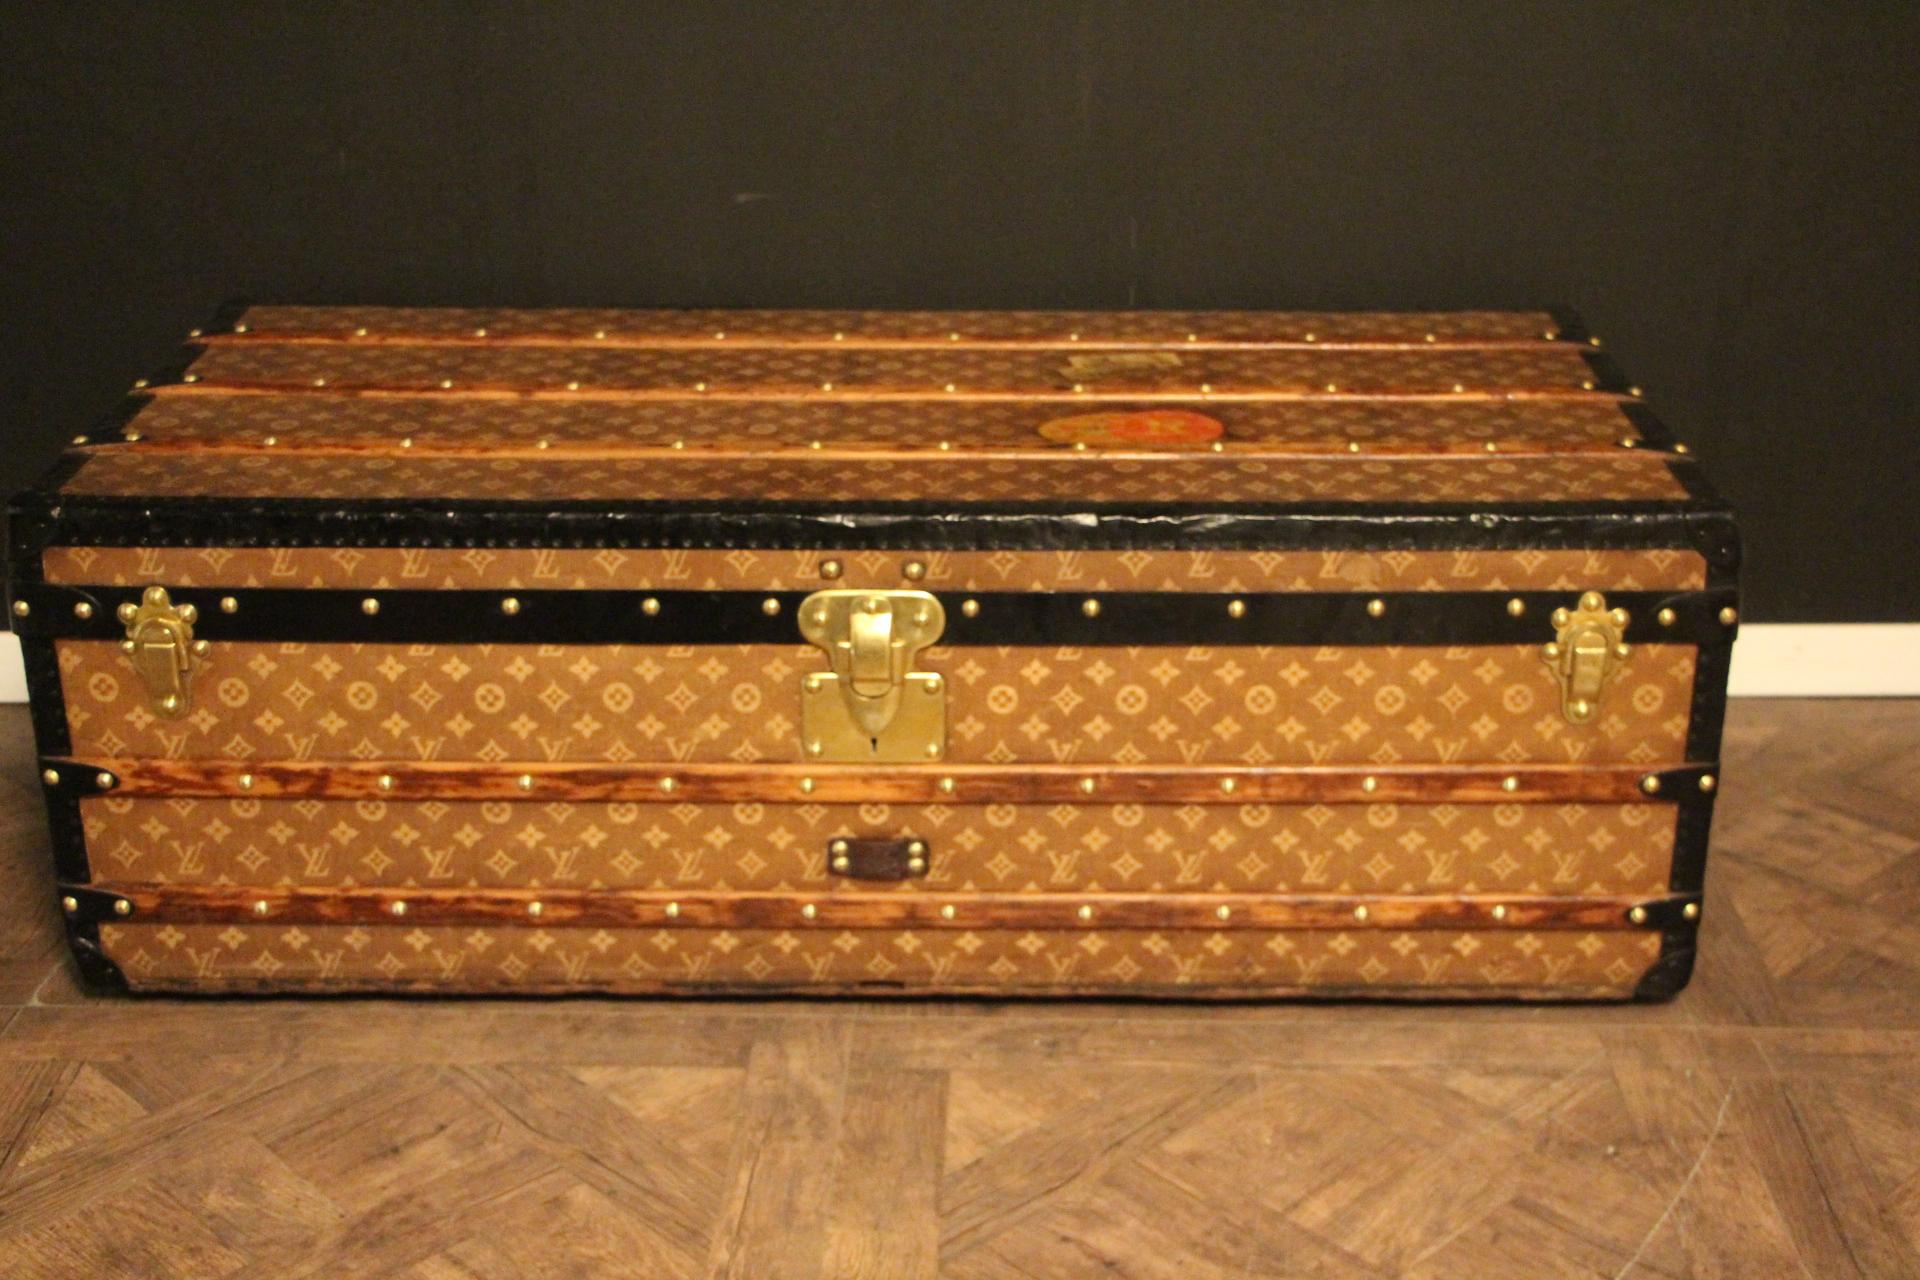 This spectacular Louis Vuitton trunk is very unusual for two reasons. First, its monogram canvas is woven canvas, a very rare canvas that Louis Vuitton used only from the very end of the 19th century till early 20th century. Second, its size is very